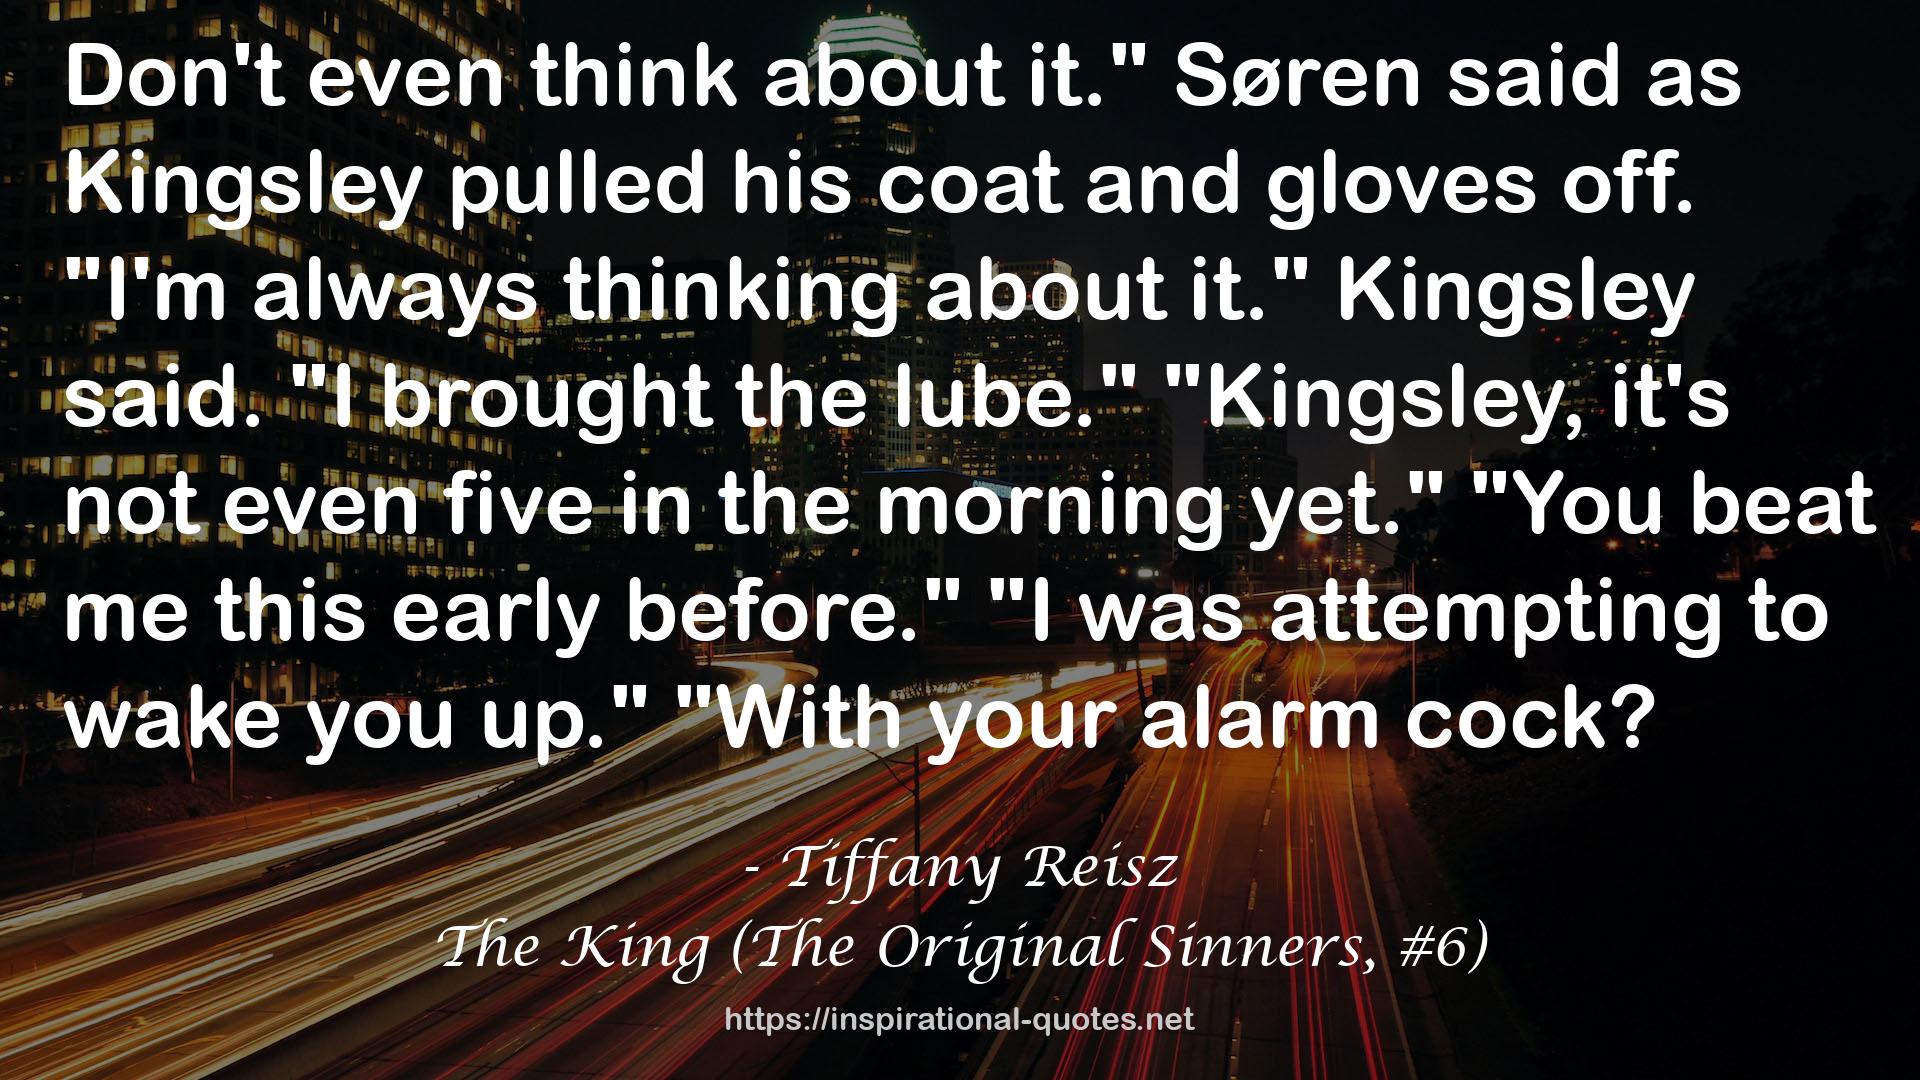 The King (The Original Sinners, #6) QUOTES